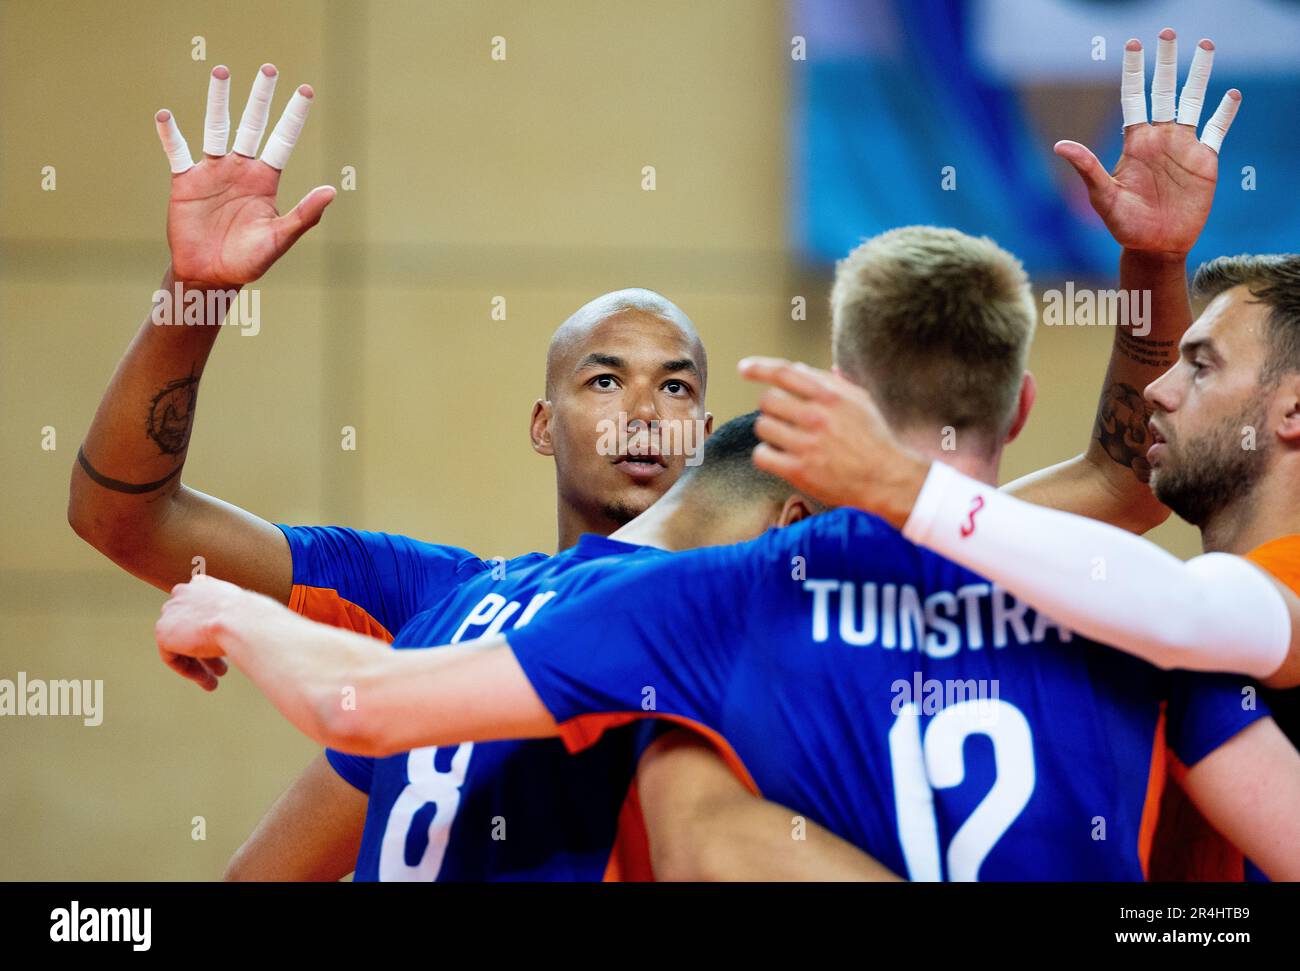 ZWOLLE - Nimir Abdelaziz of TeamNL Volleyball Men during the friendly match  against Slovenia in the Landstede Sportcentrum. The Dutch volleyball  players play the match in preparation for the Volleyball Nations League,